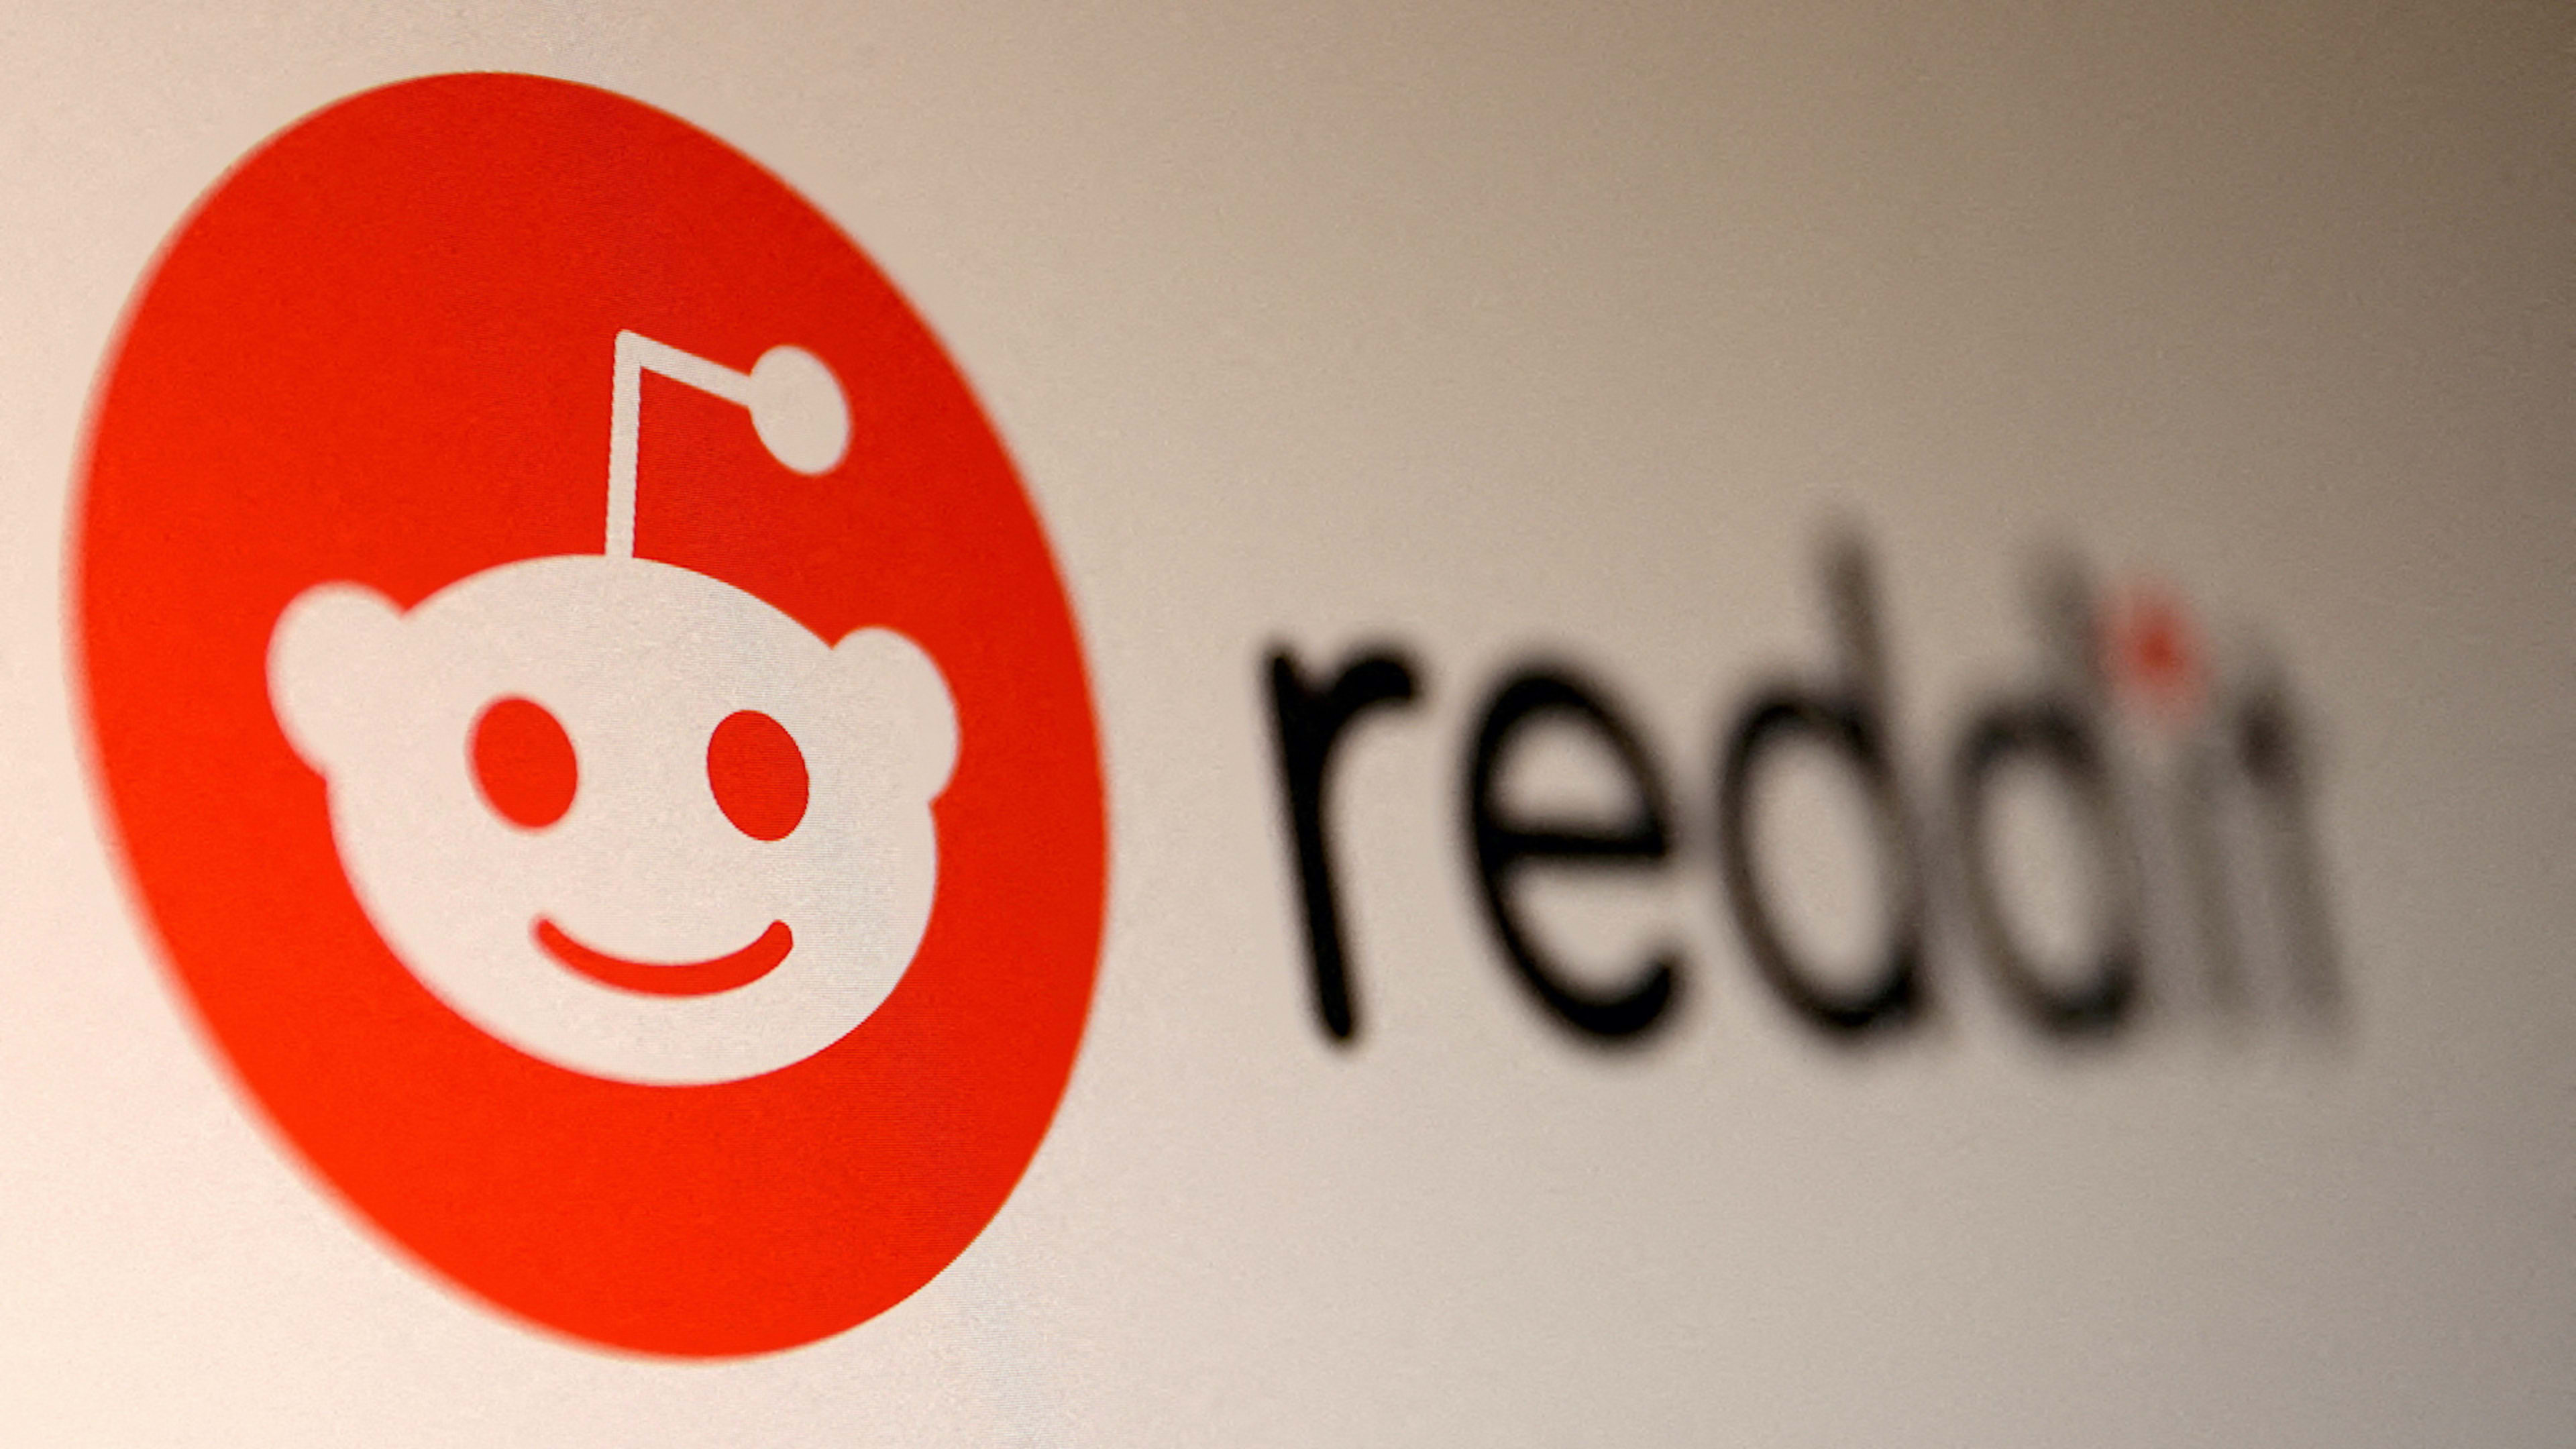 Top Wall Street brokerages start Reddit coverage but remain doubtful